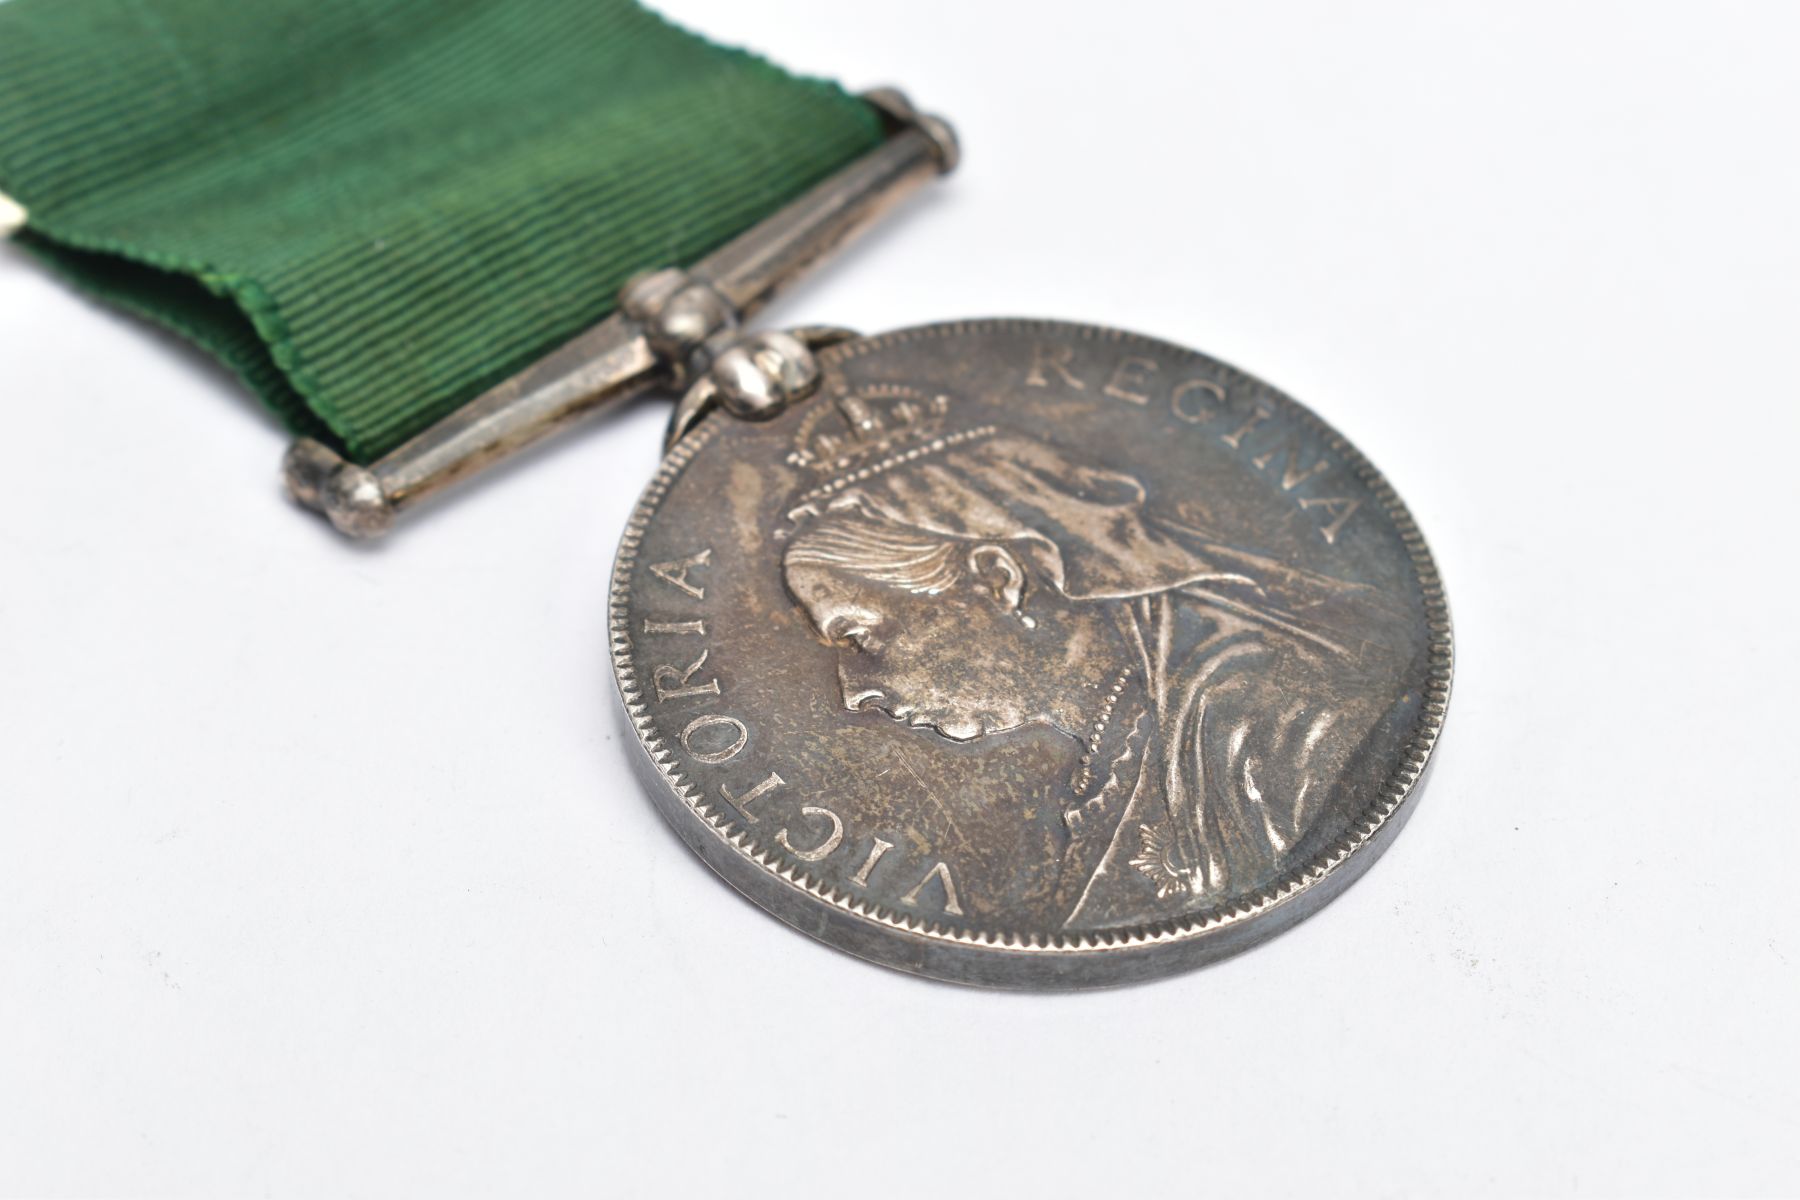 UN-NAMED EXAMPLE OF VICTORIA VOLUNTEER FORCE MEDAL, Victoria Regina Crowned head for Long service in - Image 5 of 6